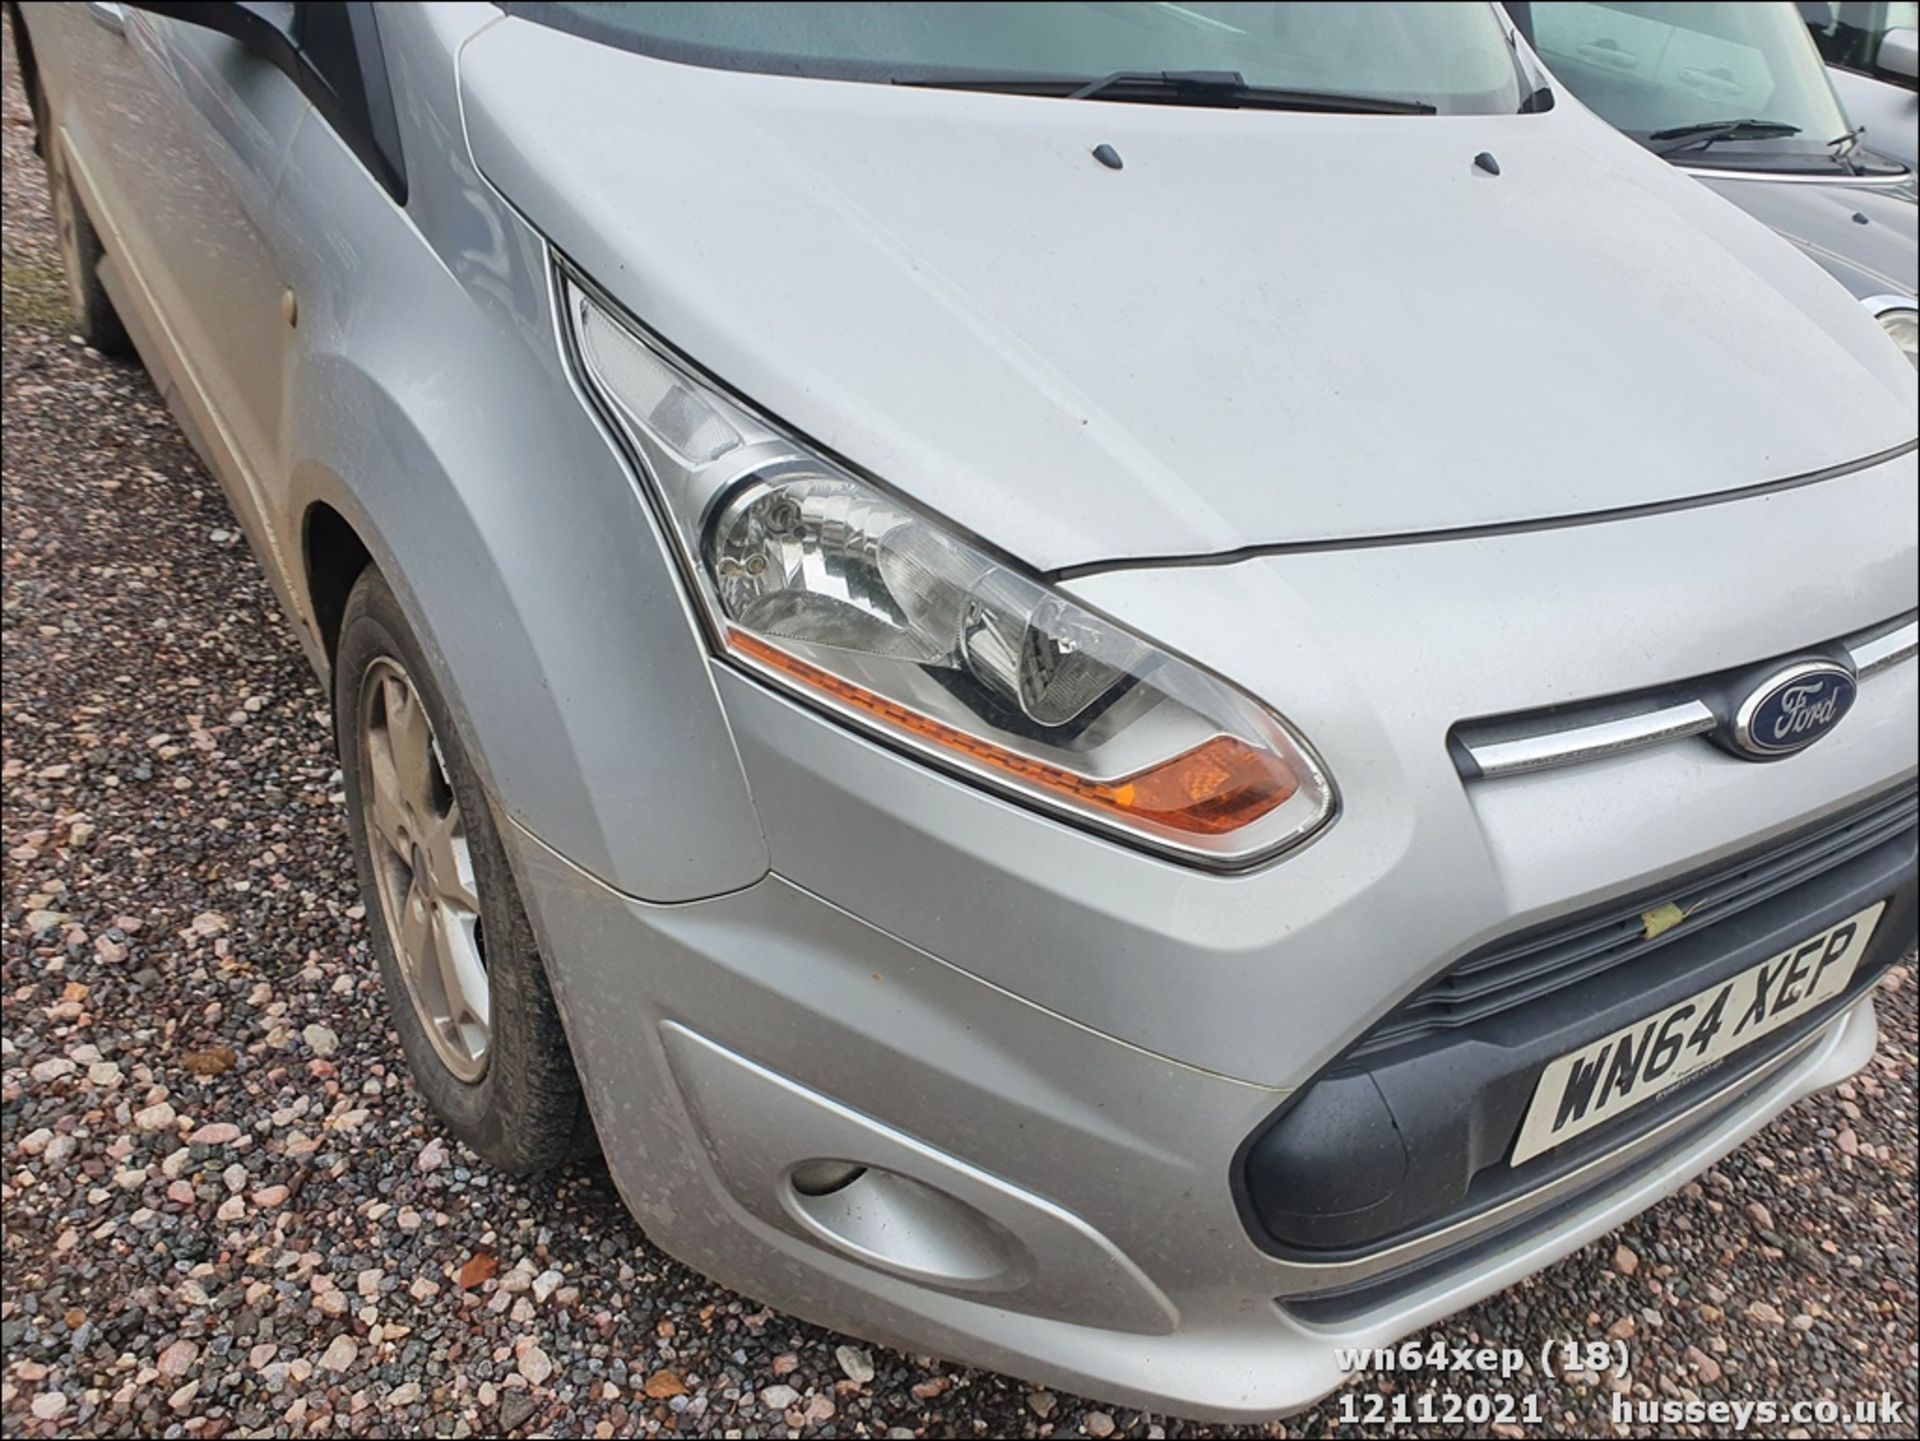 14/64 FORD TRANSIT CONNECT 200 LIMIT - 1560cc 5dr Van (Silver, 82k) - Image 18 of 27